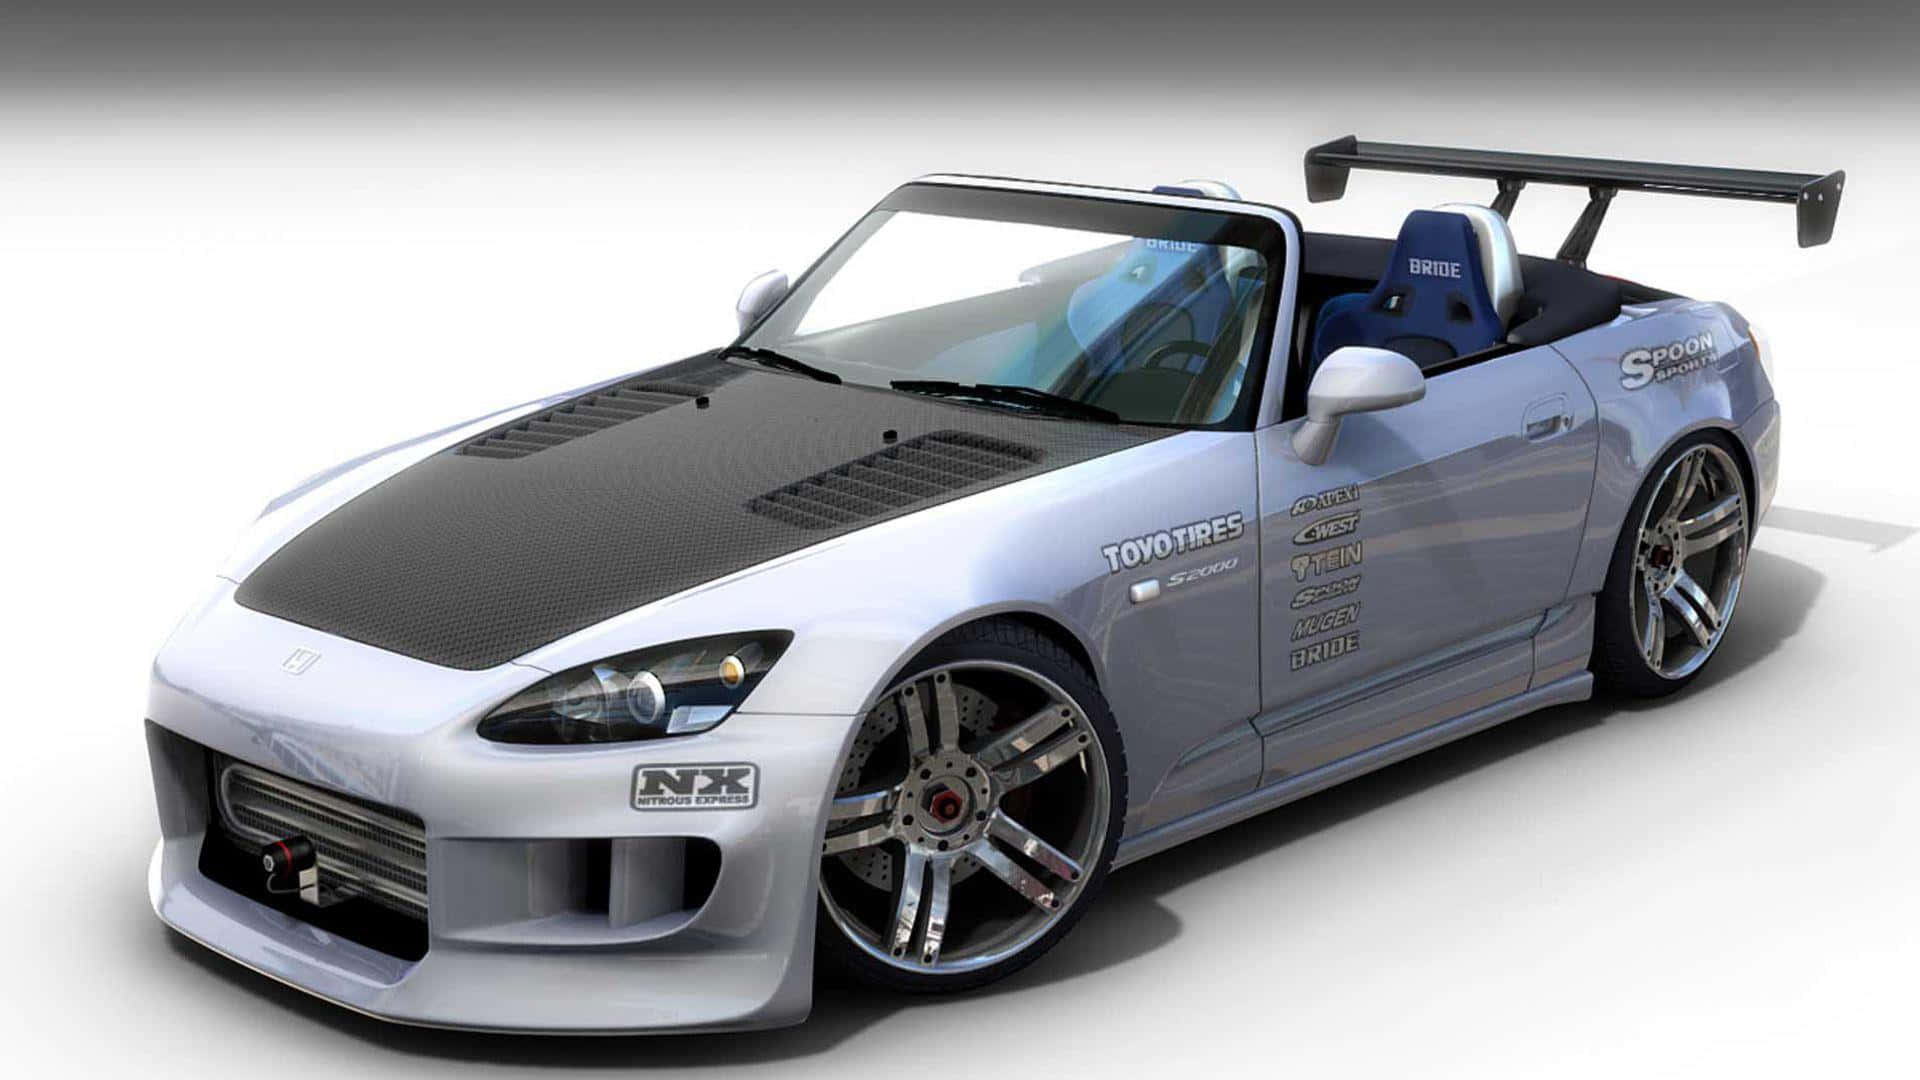 Stunning Modified Car Showcasing Its Sleek Design and Superior Performance Wallpaper